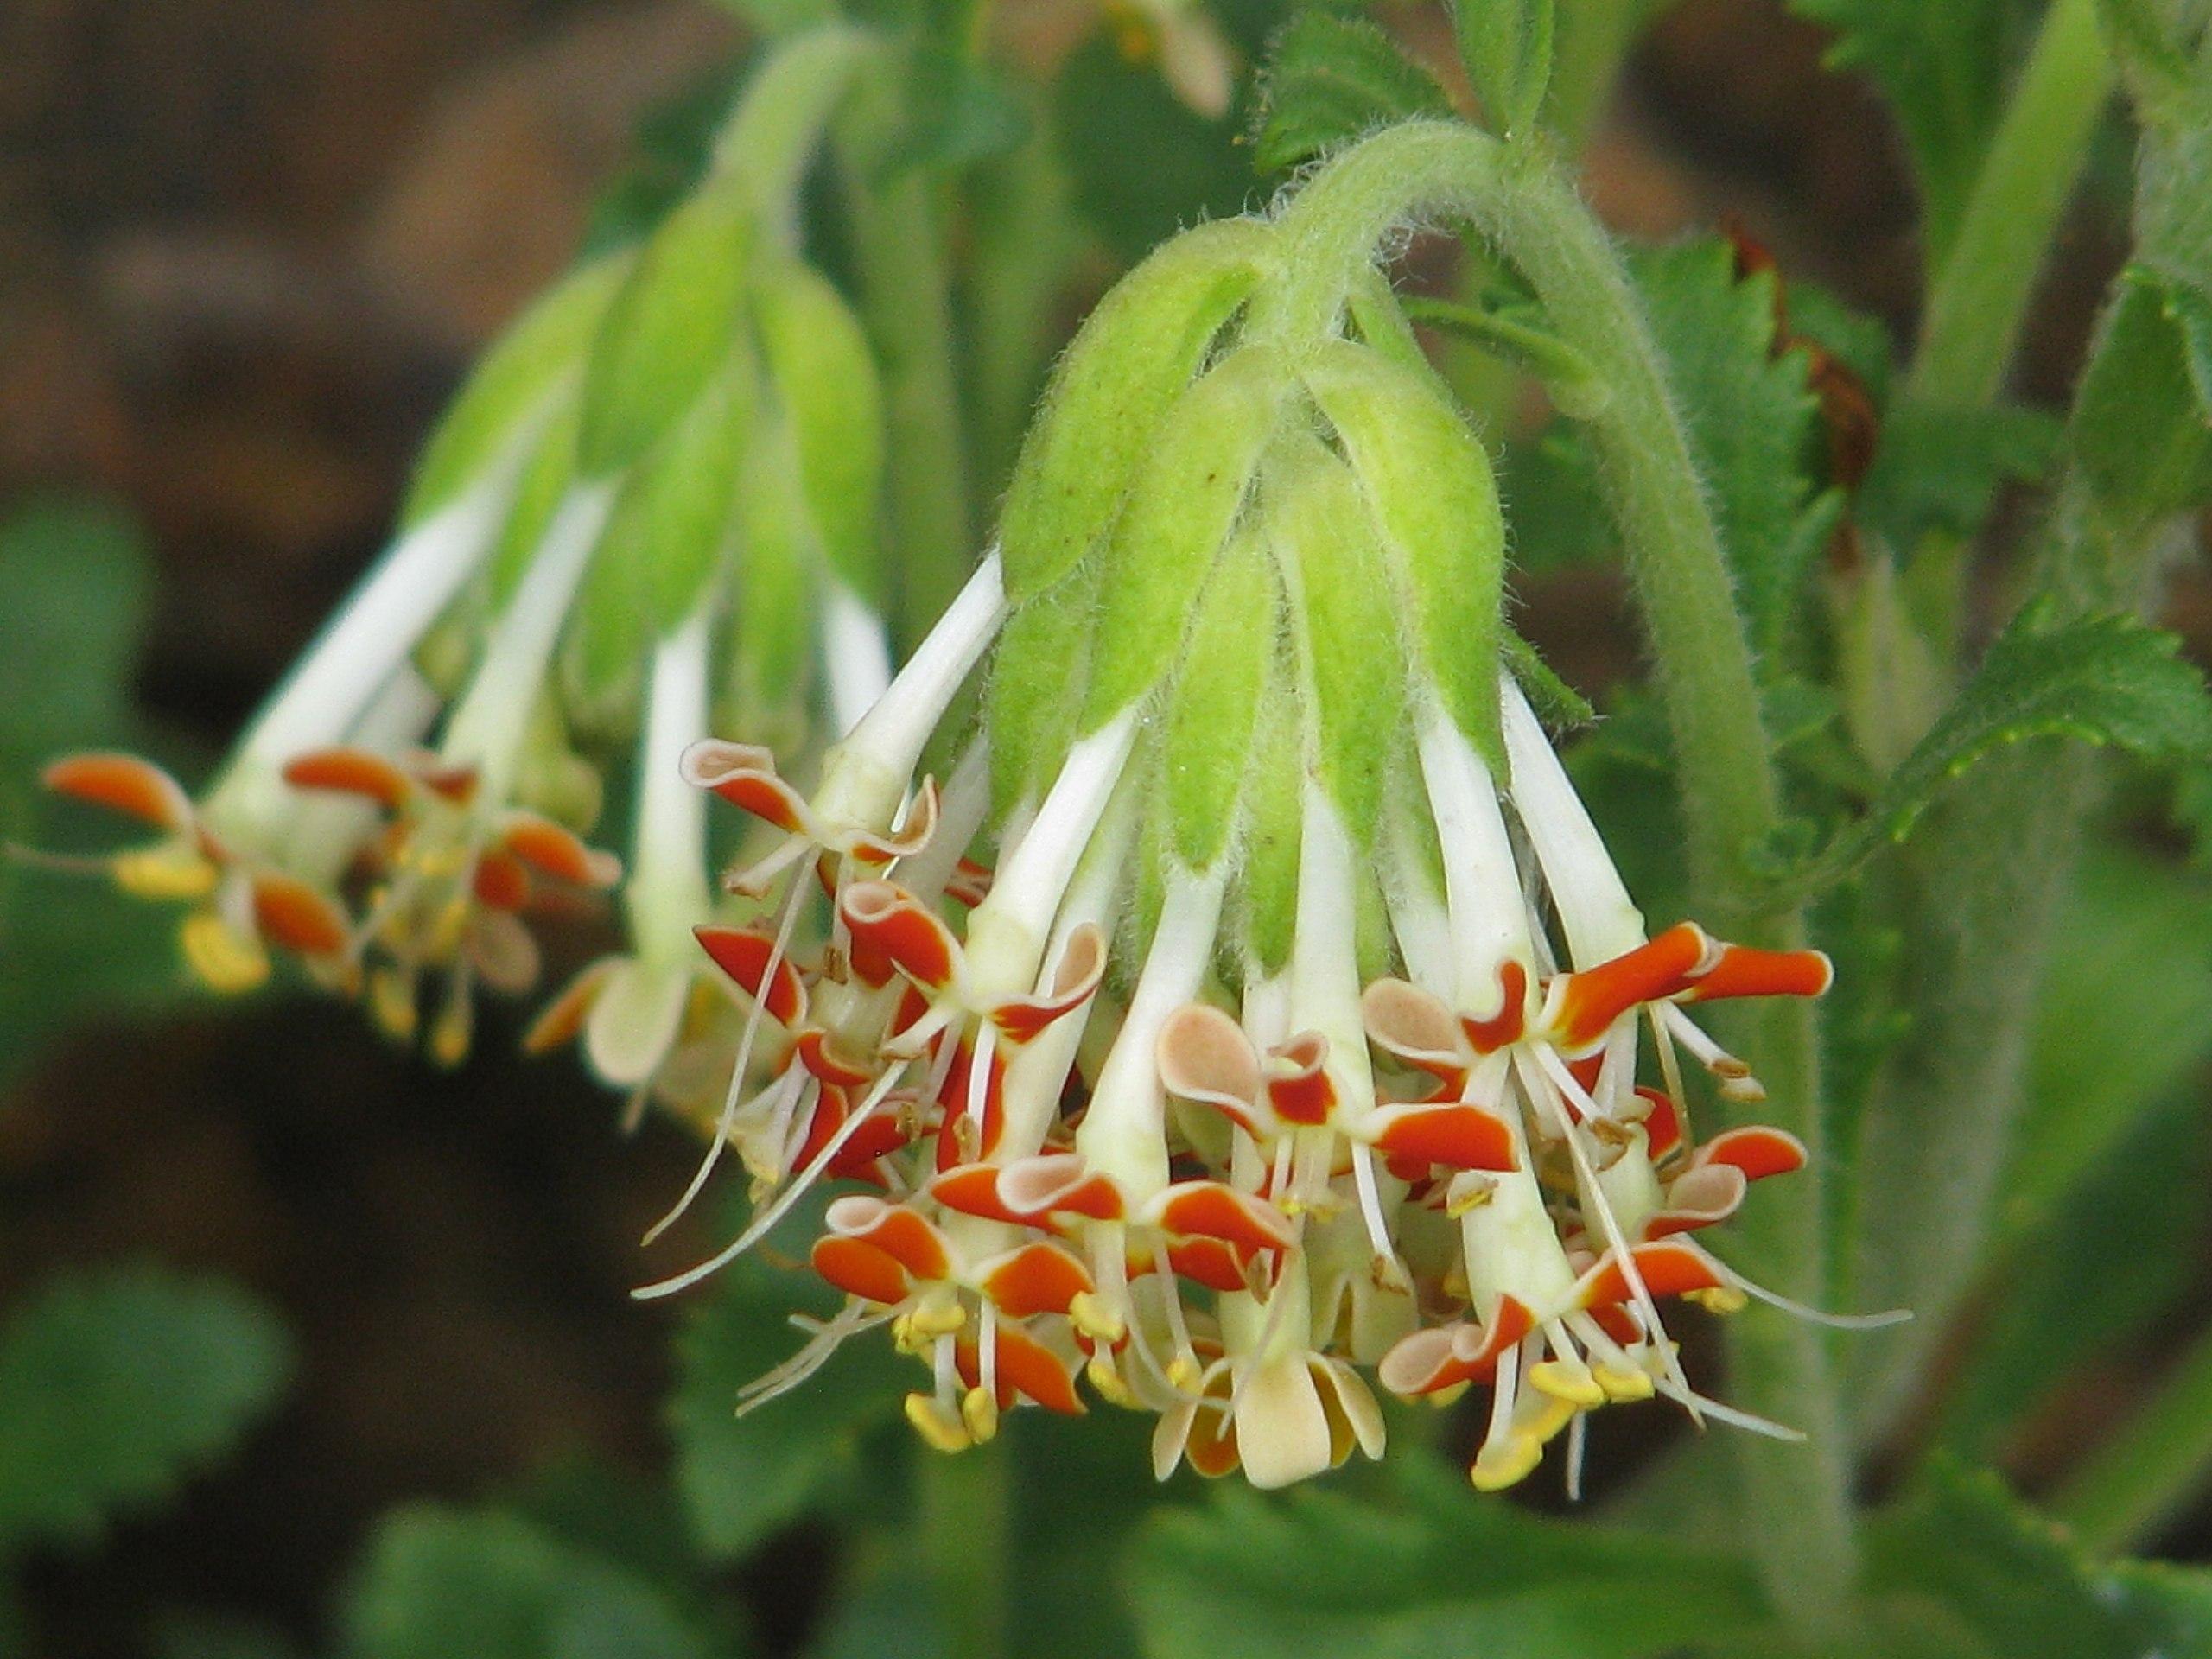 red-white flower with white stigma, yellow anthers, white anthers, lime-green leaves, white hair and light-green stems